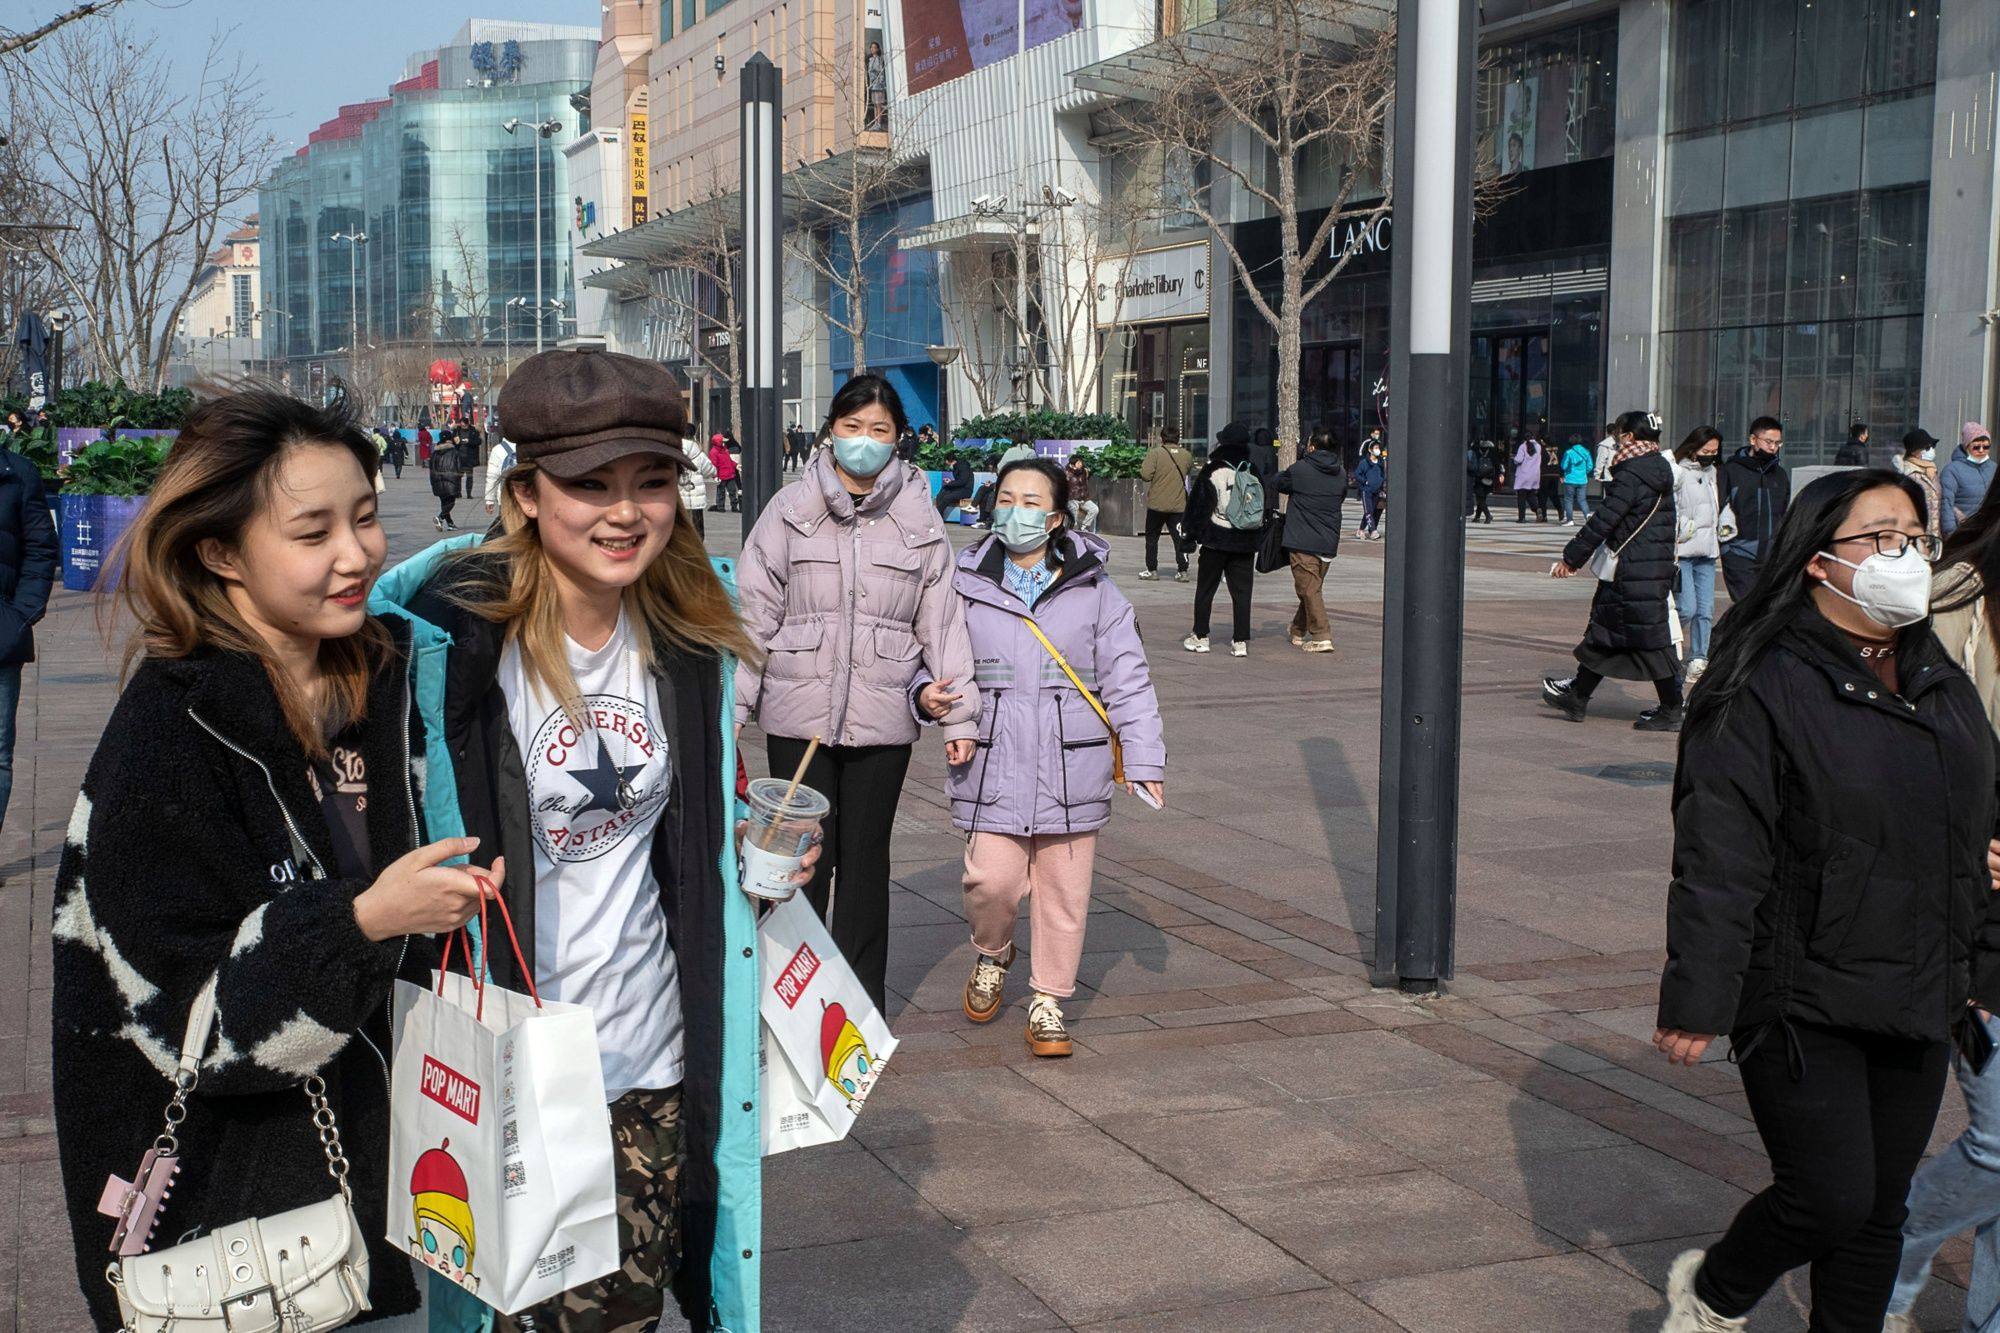 Shoppers in the Wangfujing shopping area in Beijing on February 10. China’s high savings rate and youth unemployment may become stumbling blocks to spending if the economic recovery fails to broaden. Source: Bloomberg